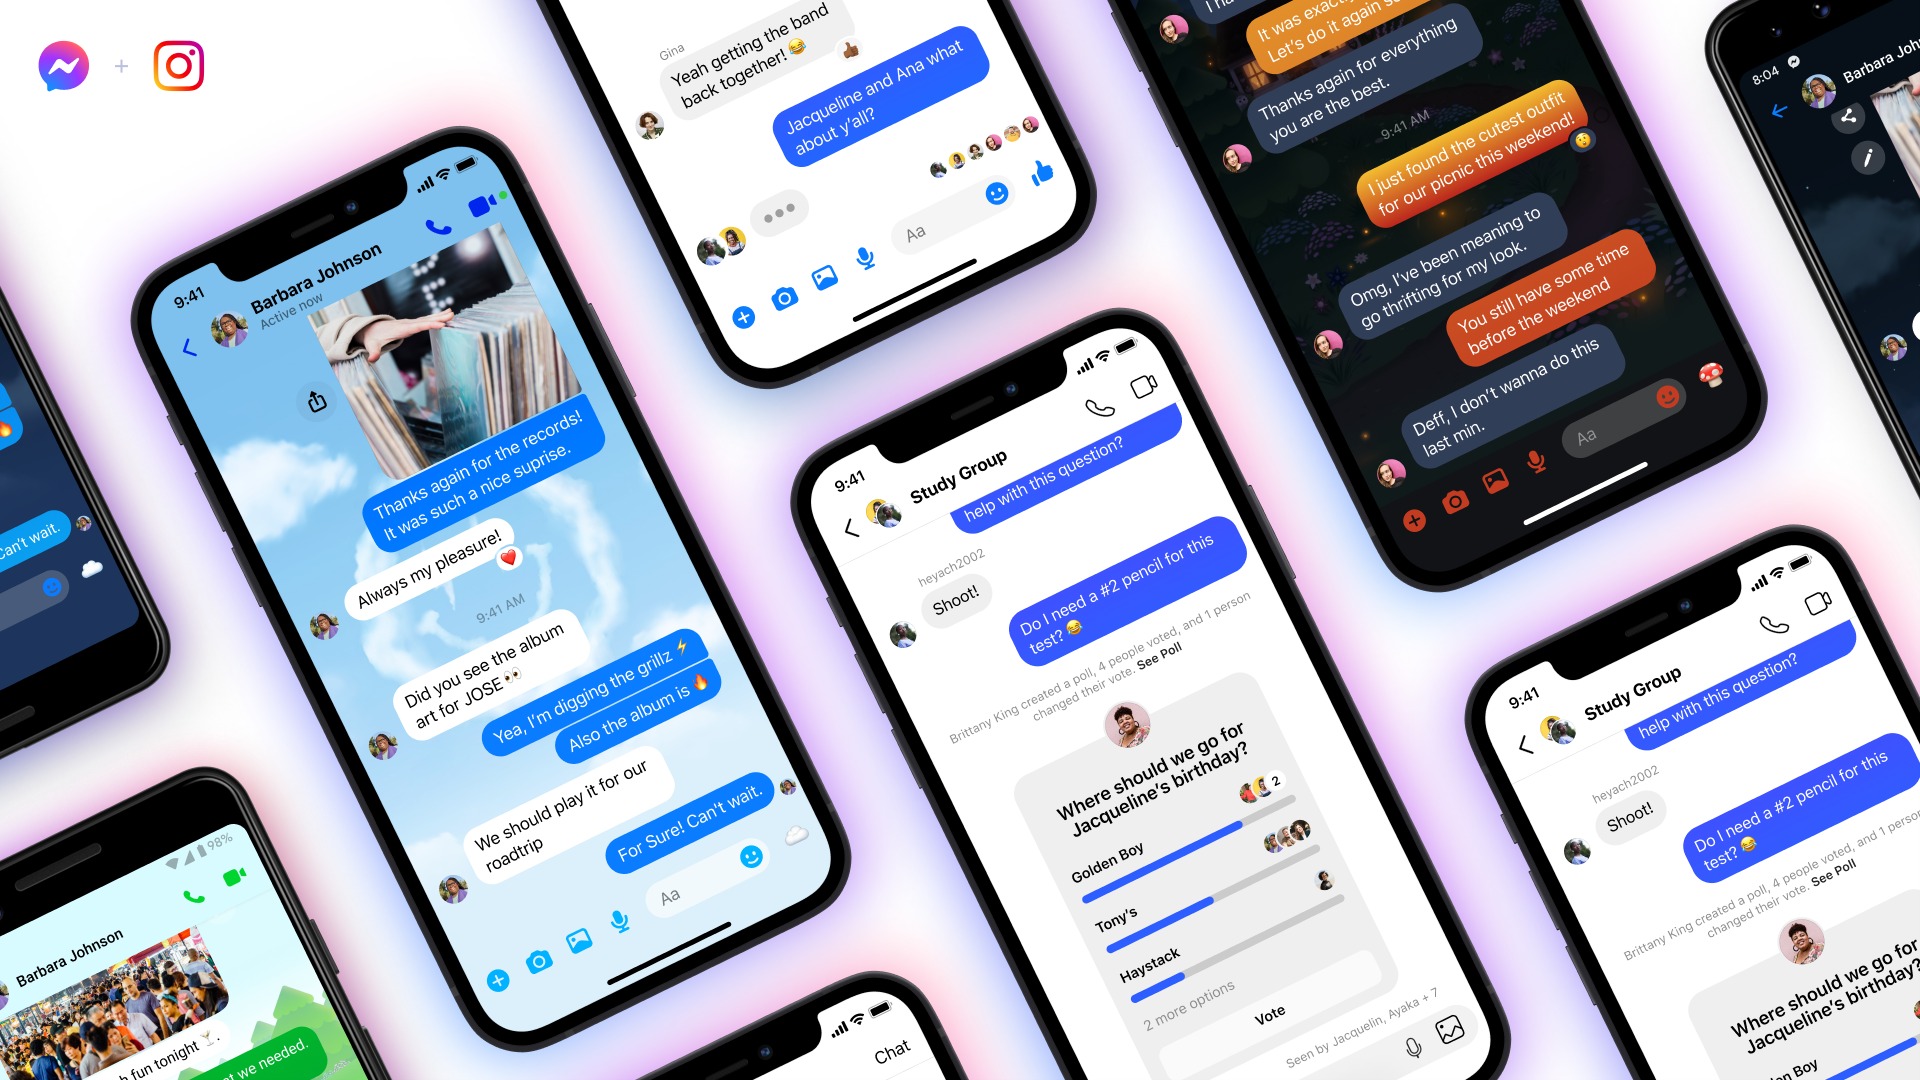 Cross-App Chats: Facebook Messenger and Instagram groups will be unified